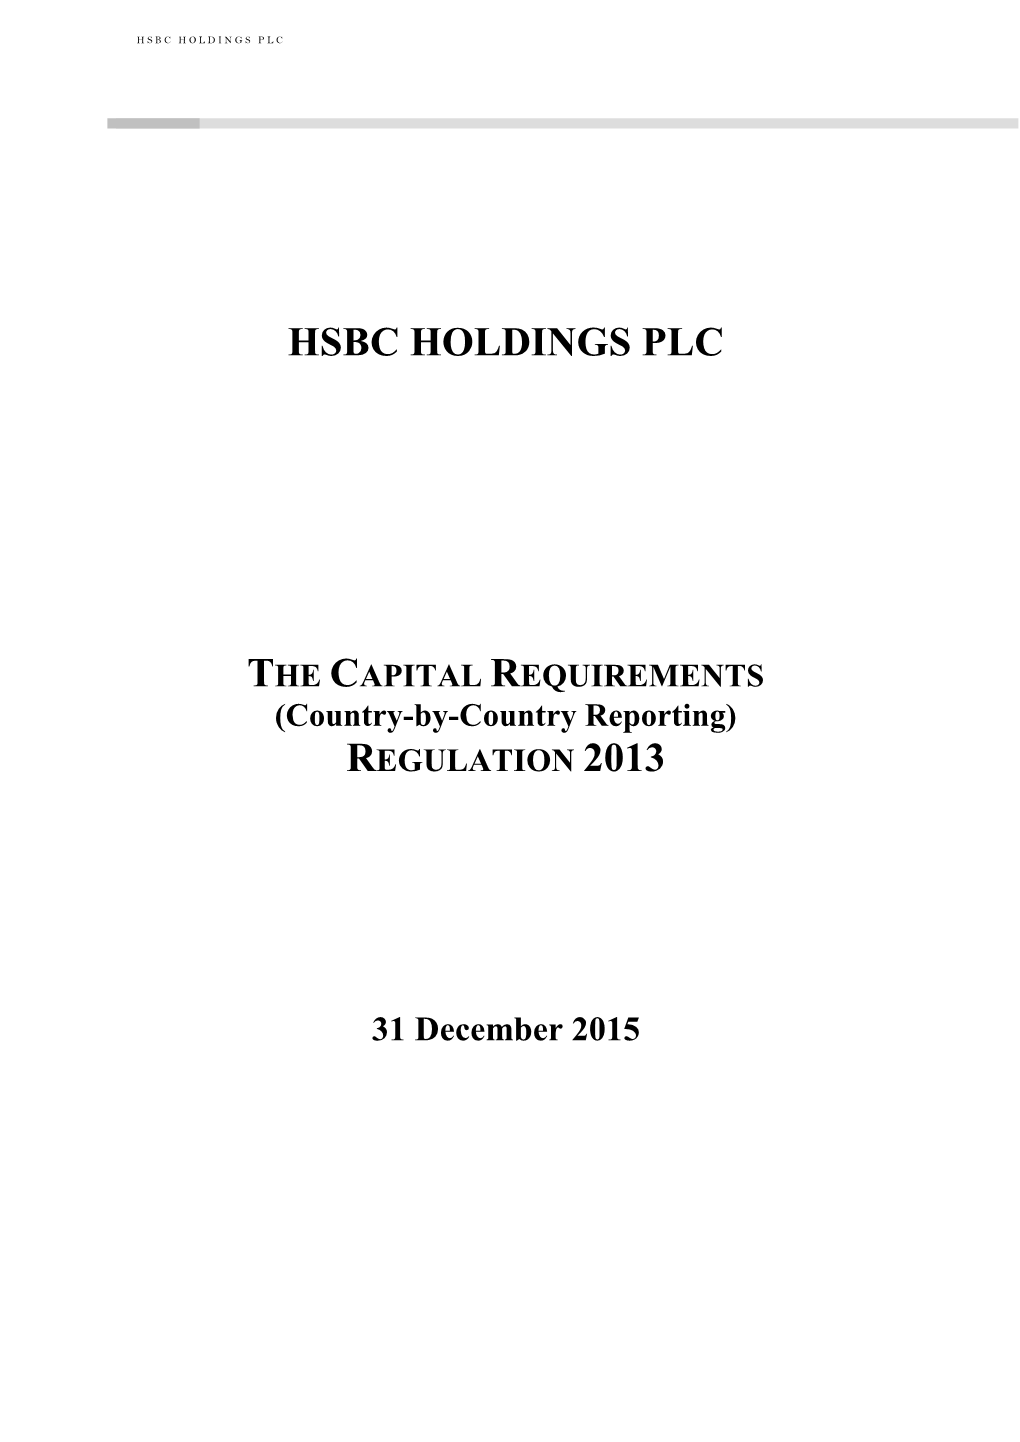 THE CAPITAL REQUIREMENTS (Country-By-Country Reporting) REGULATION 2013